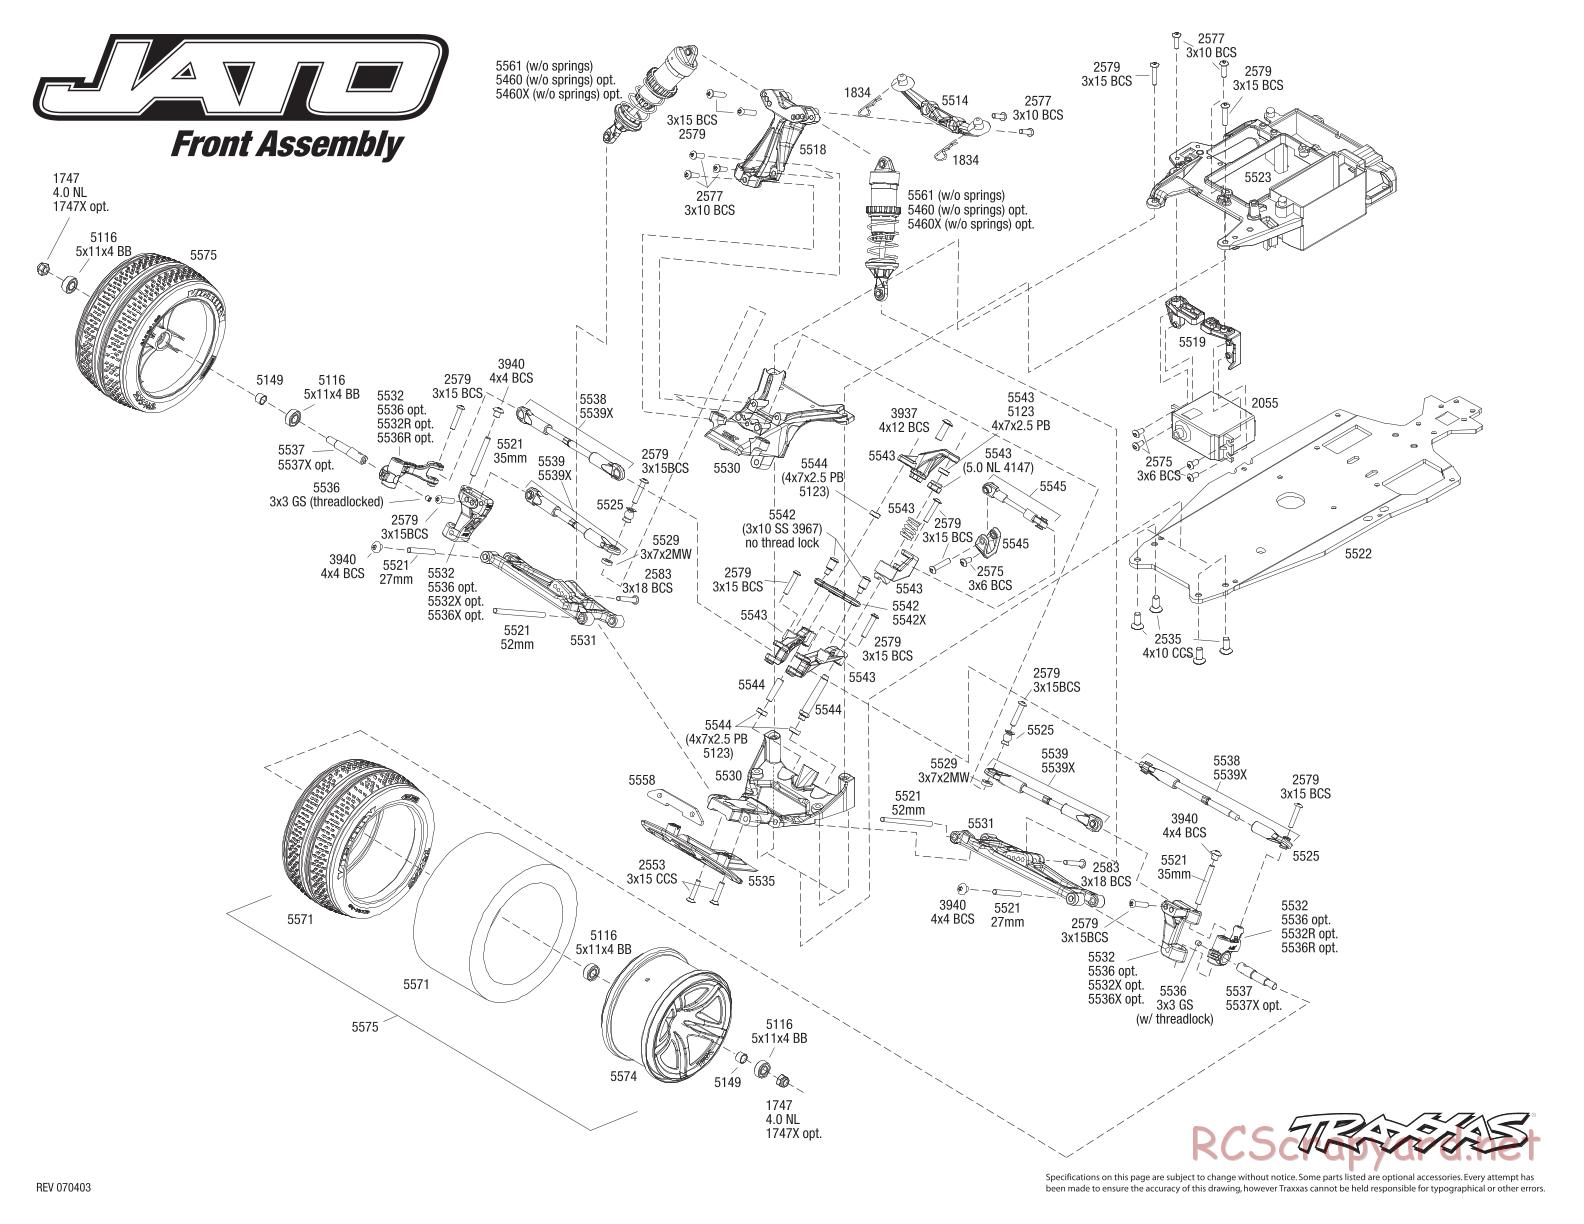 Traxxas - Jato 2.5 (2005) - Exploded Views - Page 2